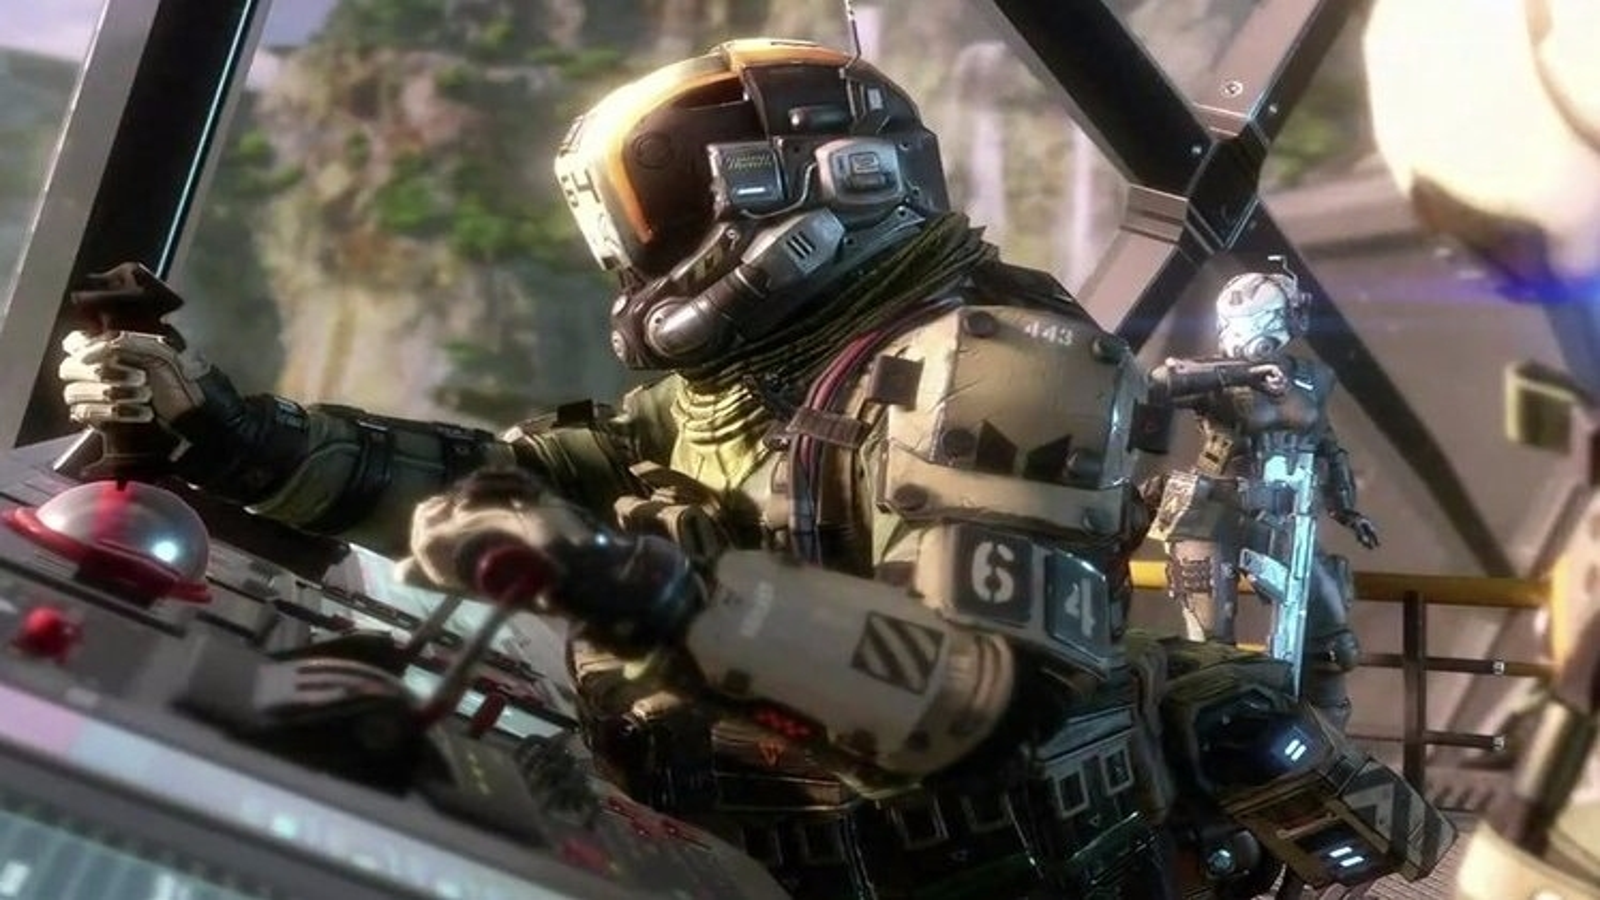 TITANFALL 2 In 2023 Multiplayer Gameplay 